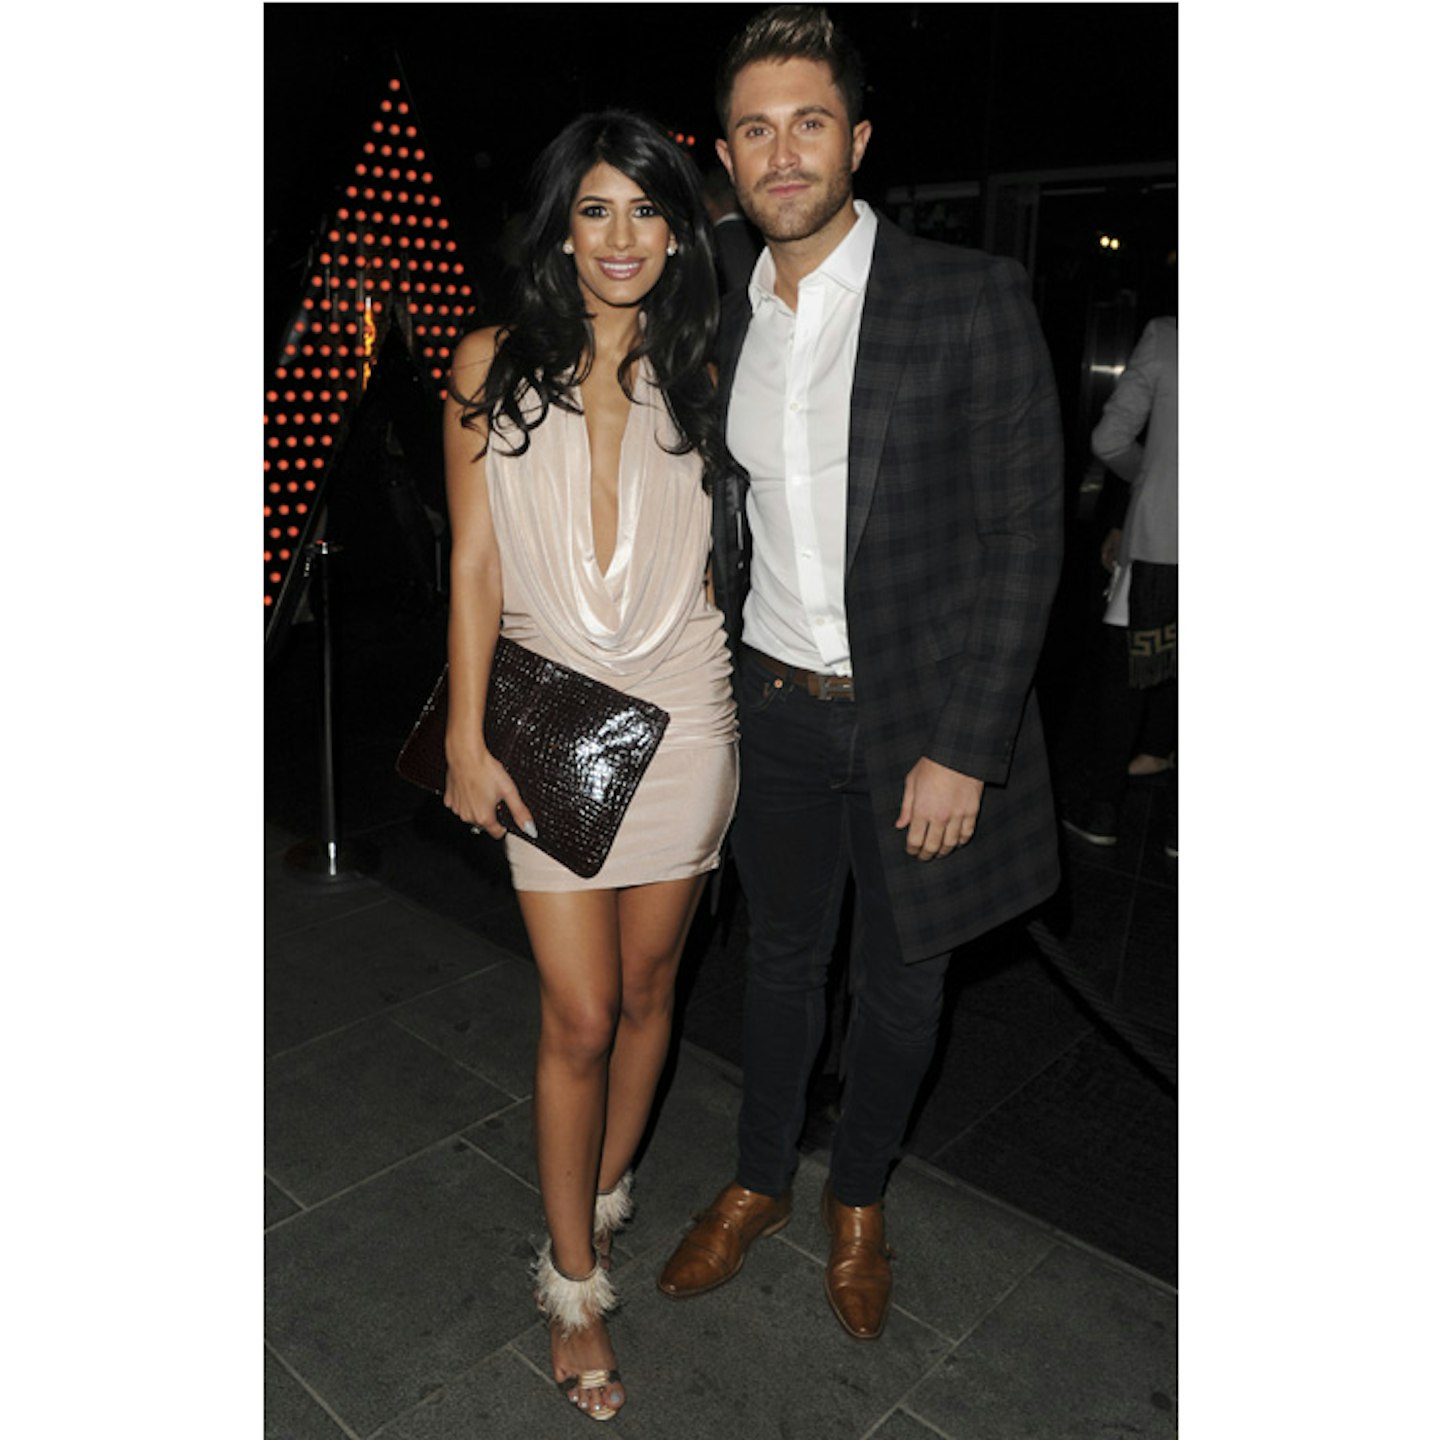 Jasmin with boyfriend Ross Worswick at her clothing line launch